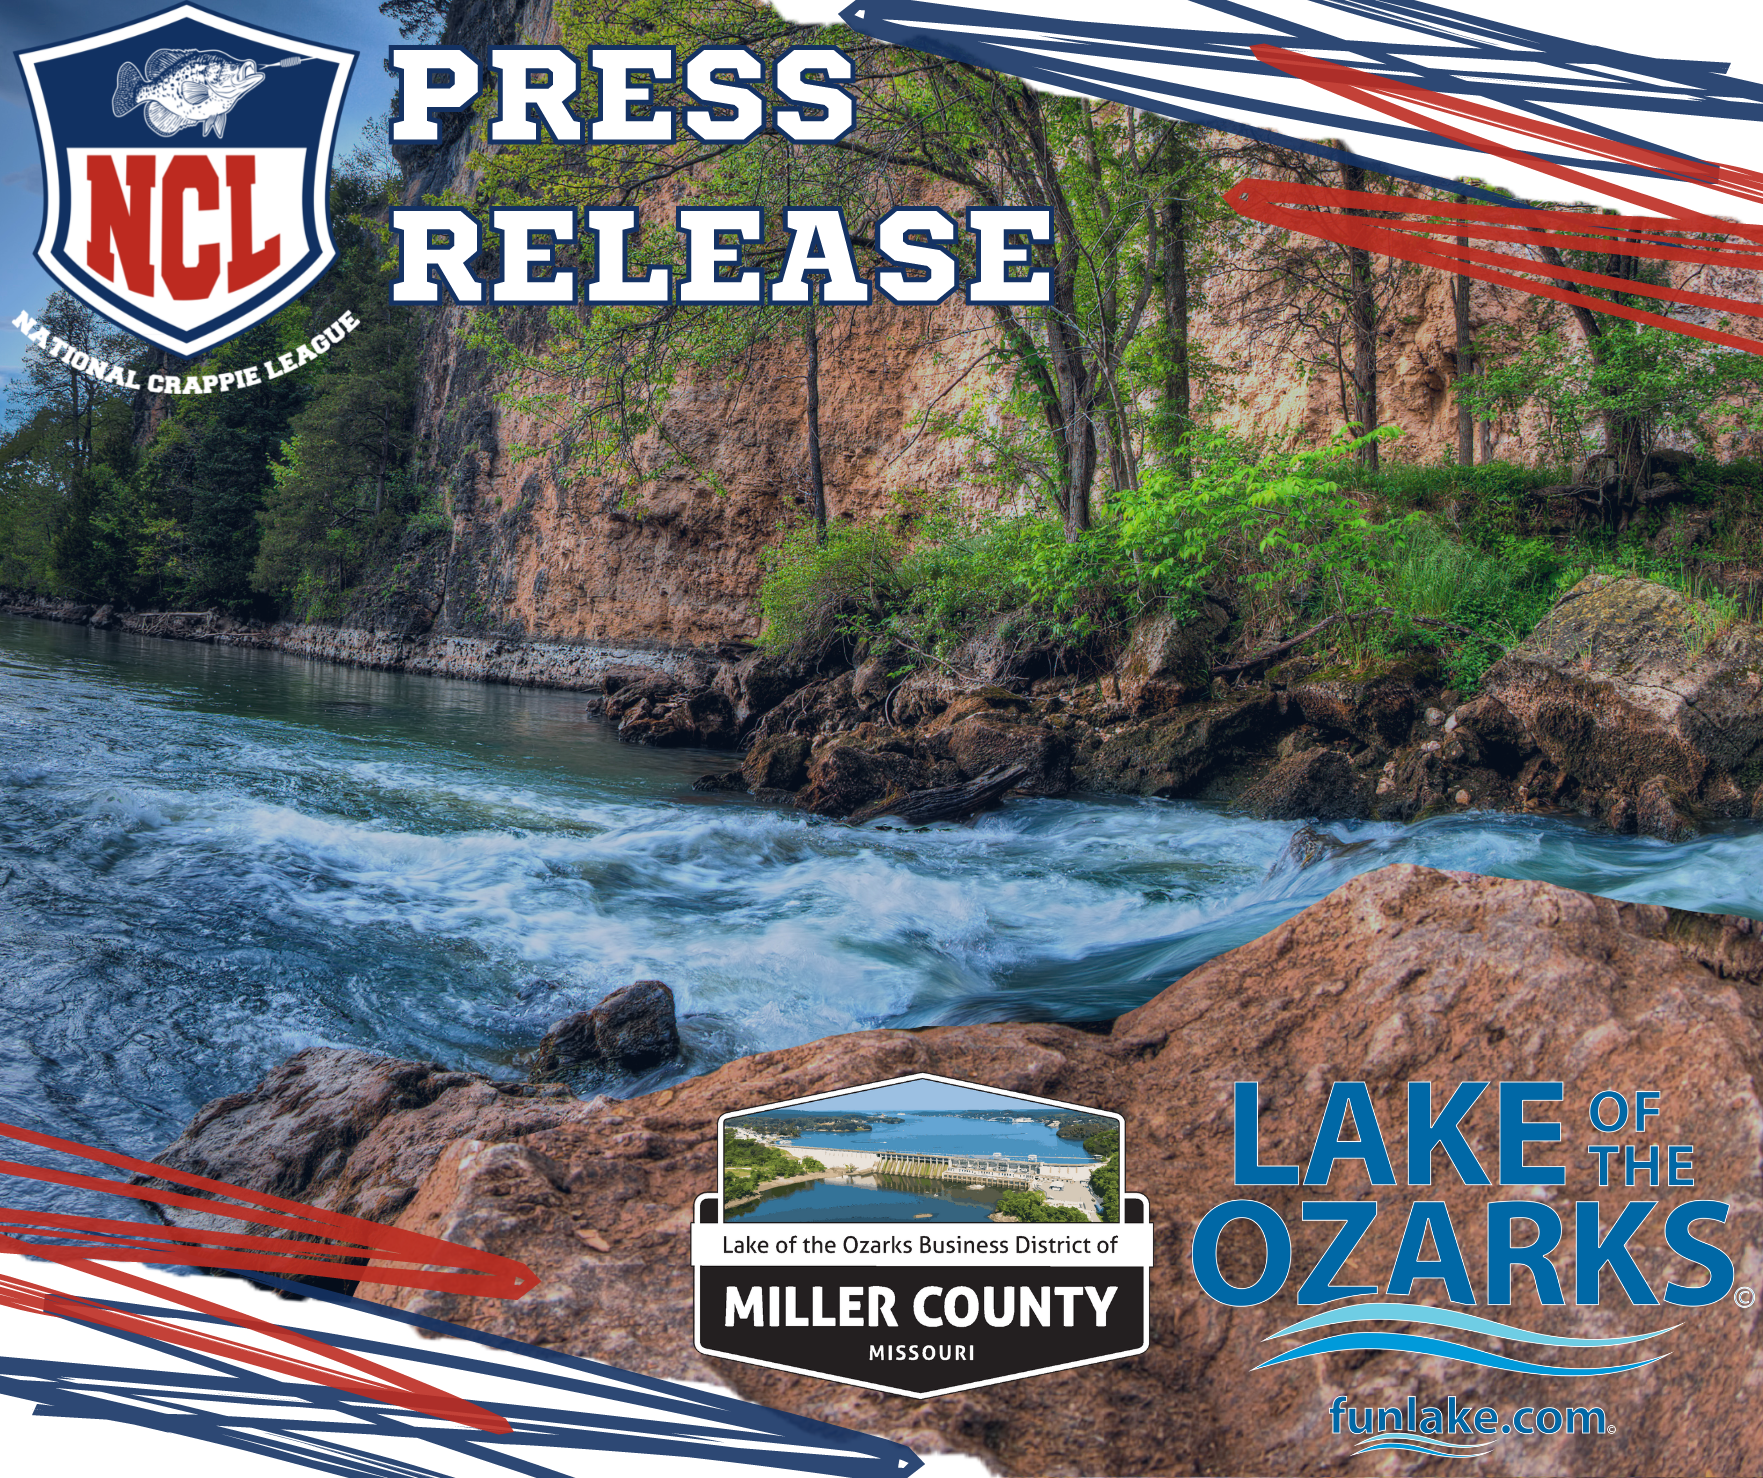 Lake of the Ozarks Press Release 2023 NCL